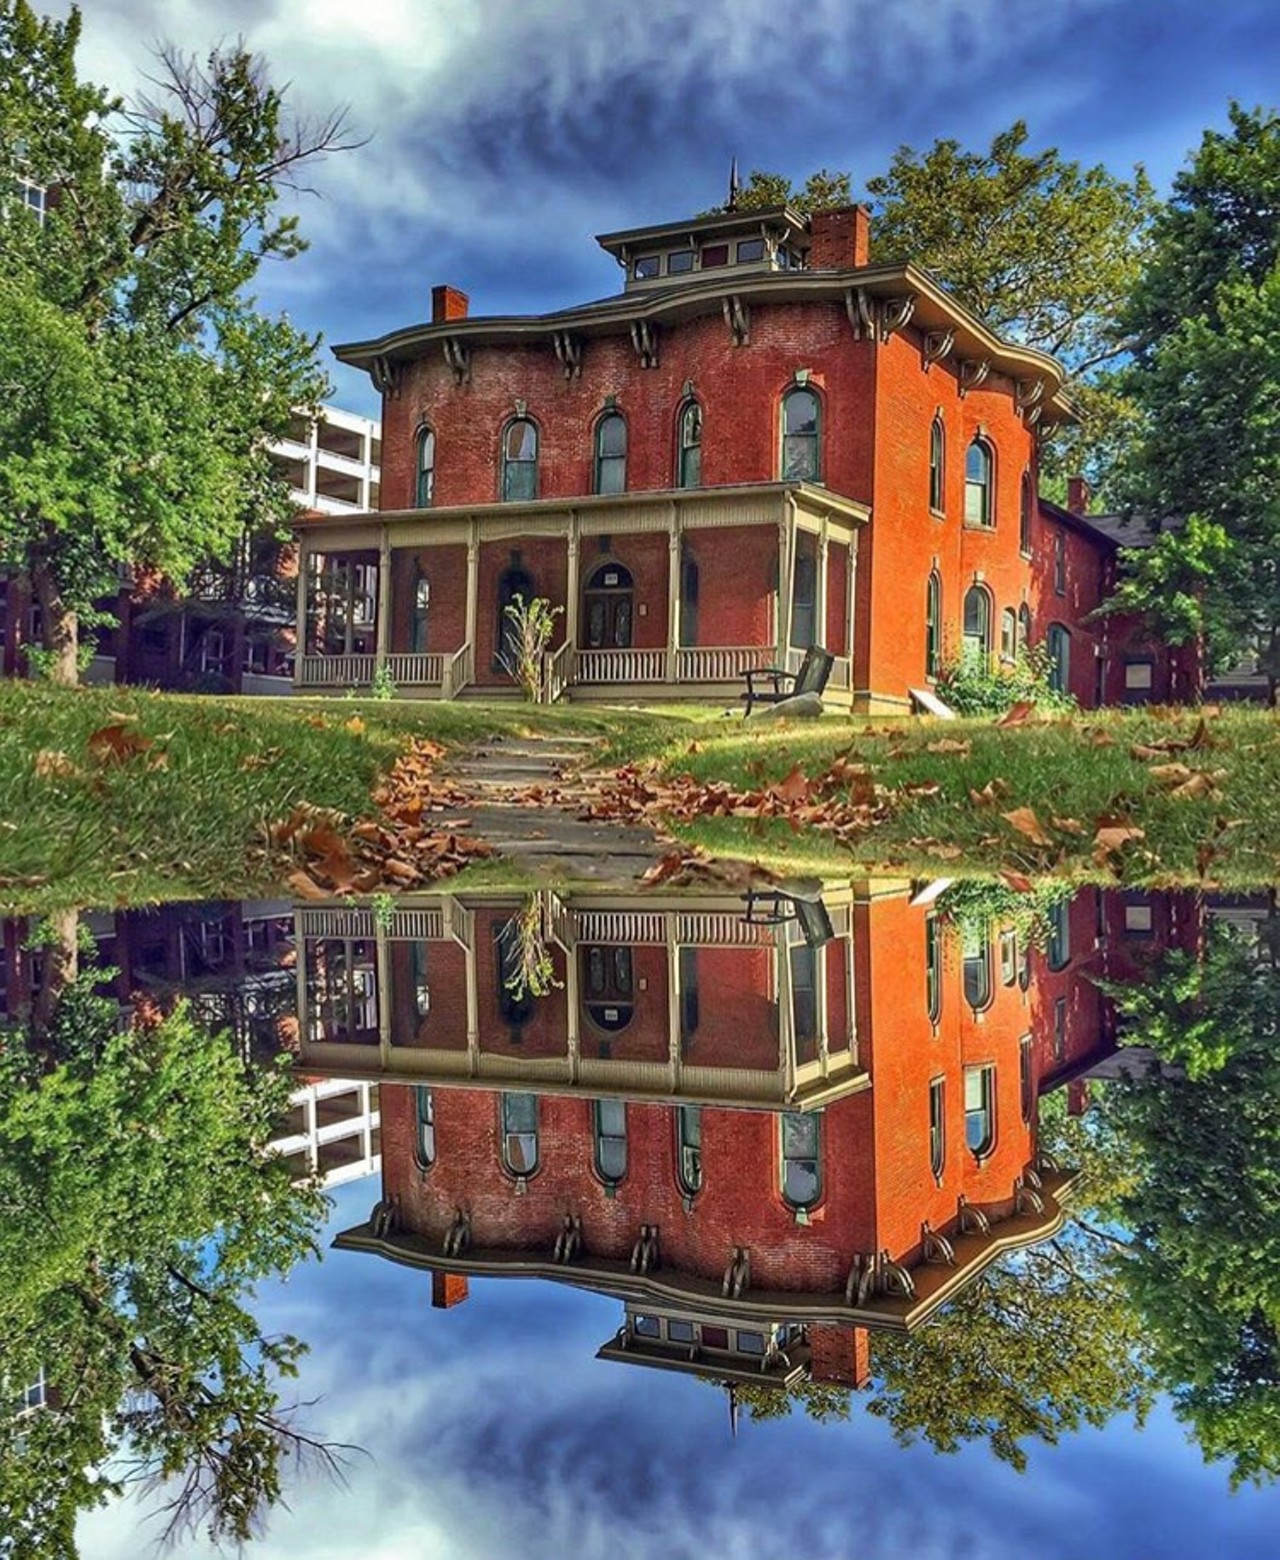 Cozad Bates House
11508 Mayfield Rd.
This cozy red brick house is the oldest surviving pre-Civil War structure in University Circle. The house, built in a rare italianate style, has been saved from demolition on multiple occasions and has been preserved as a national historic landmark. 
Photo viaInthe216/Instagram